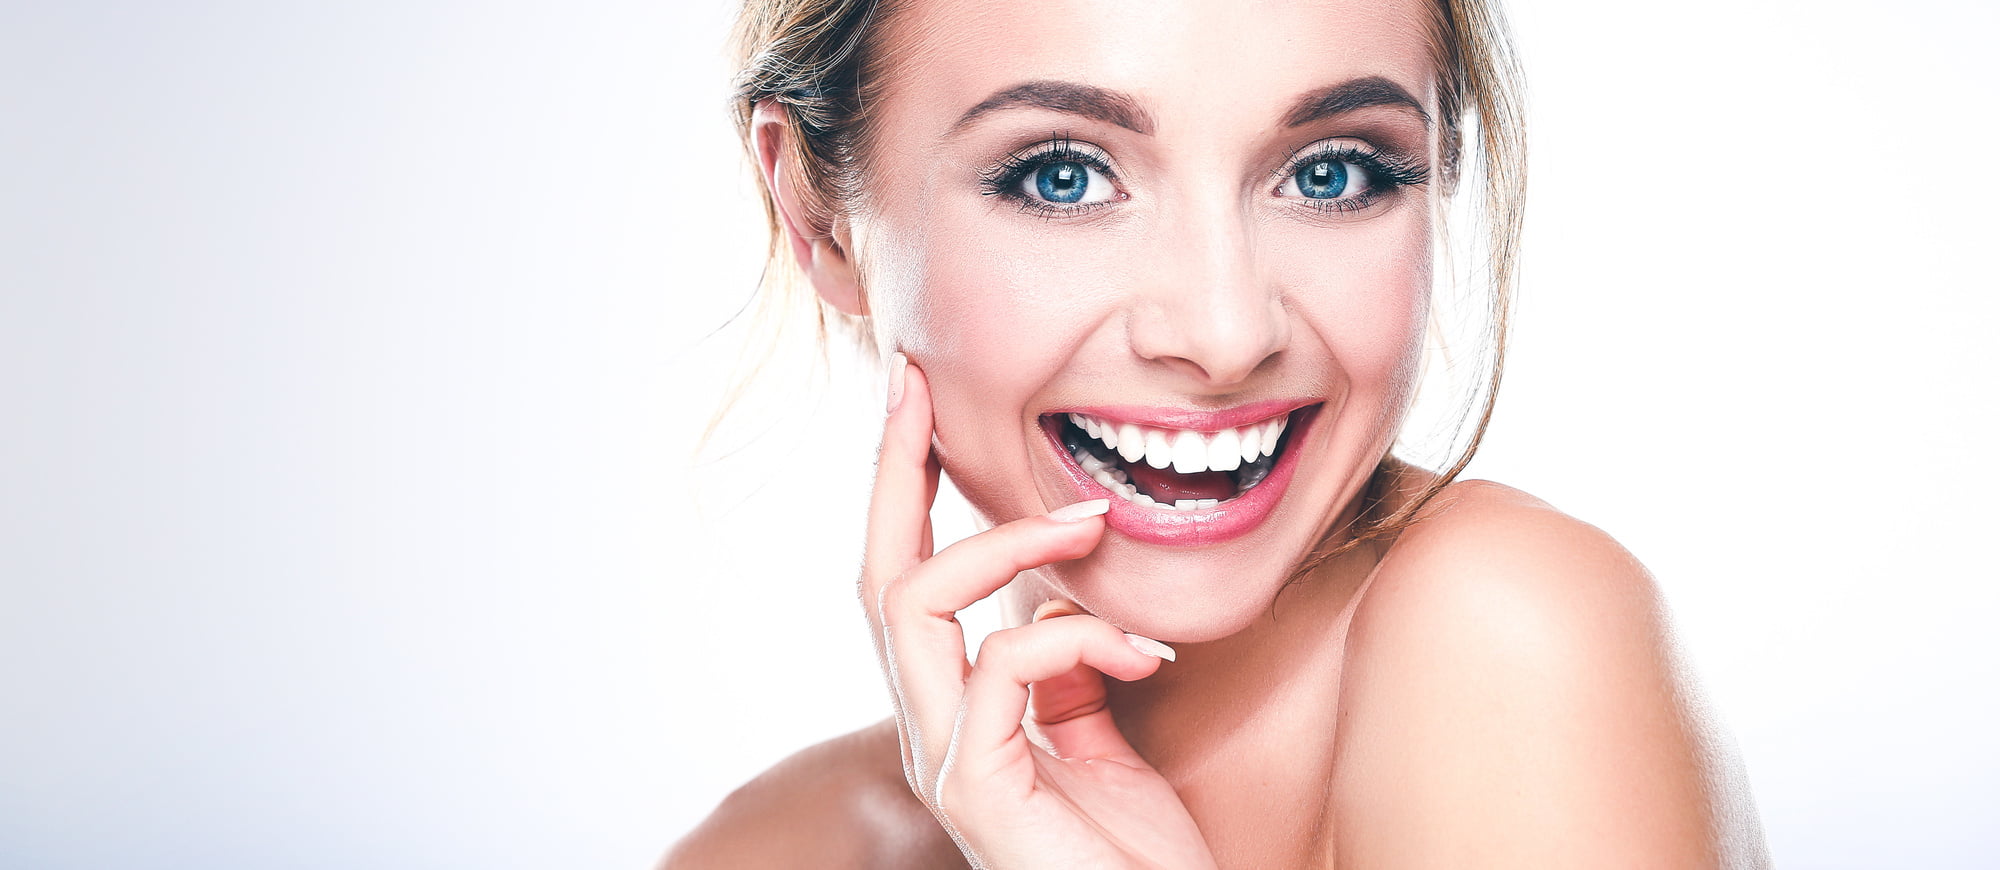 From improving your oral health to having the perfect smile you've always dreamed of, click here to explore the benefits of a smile makeover.